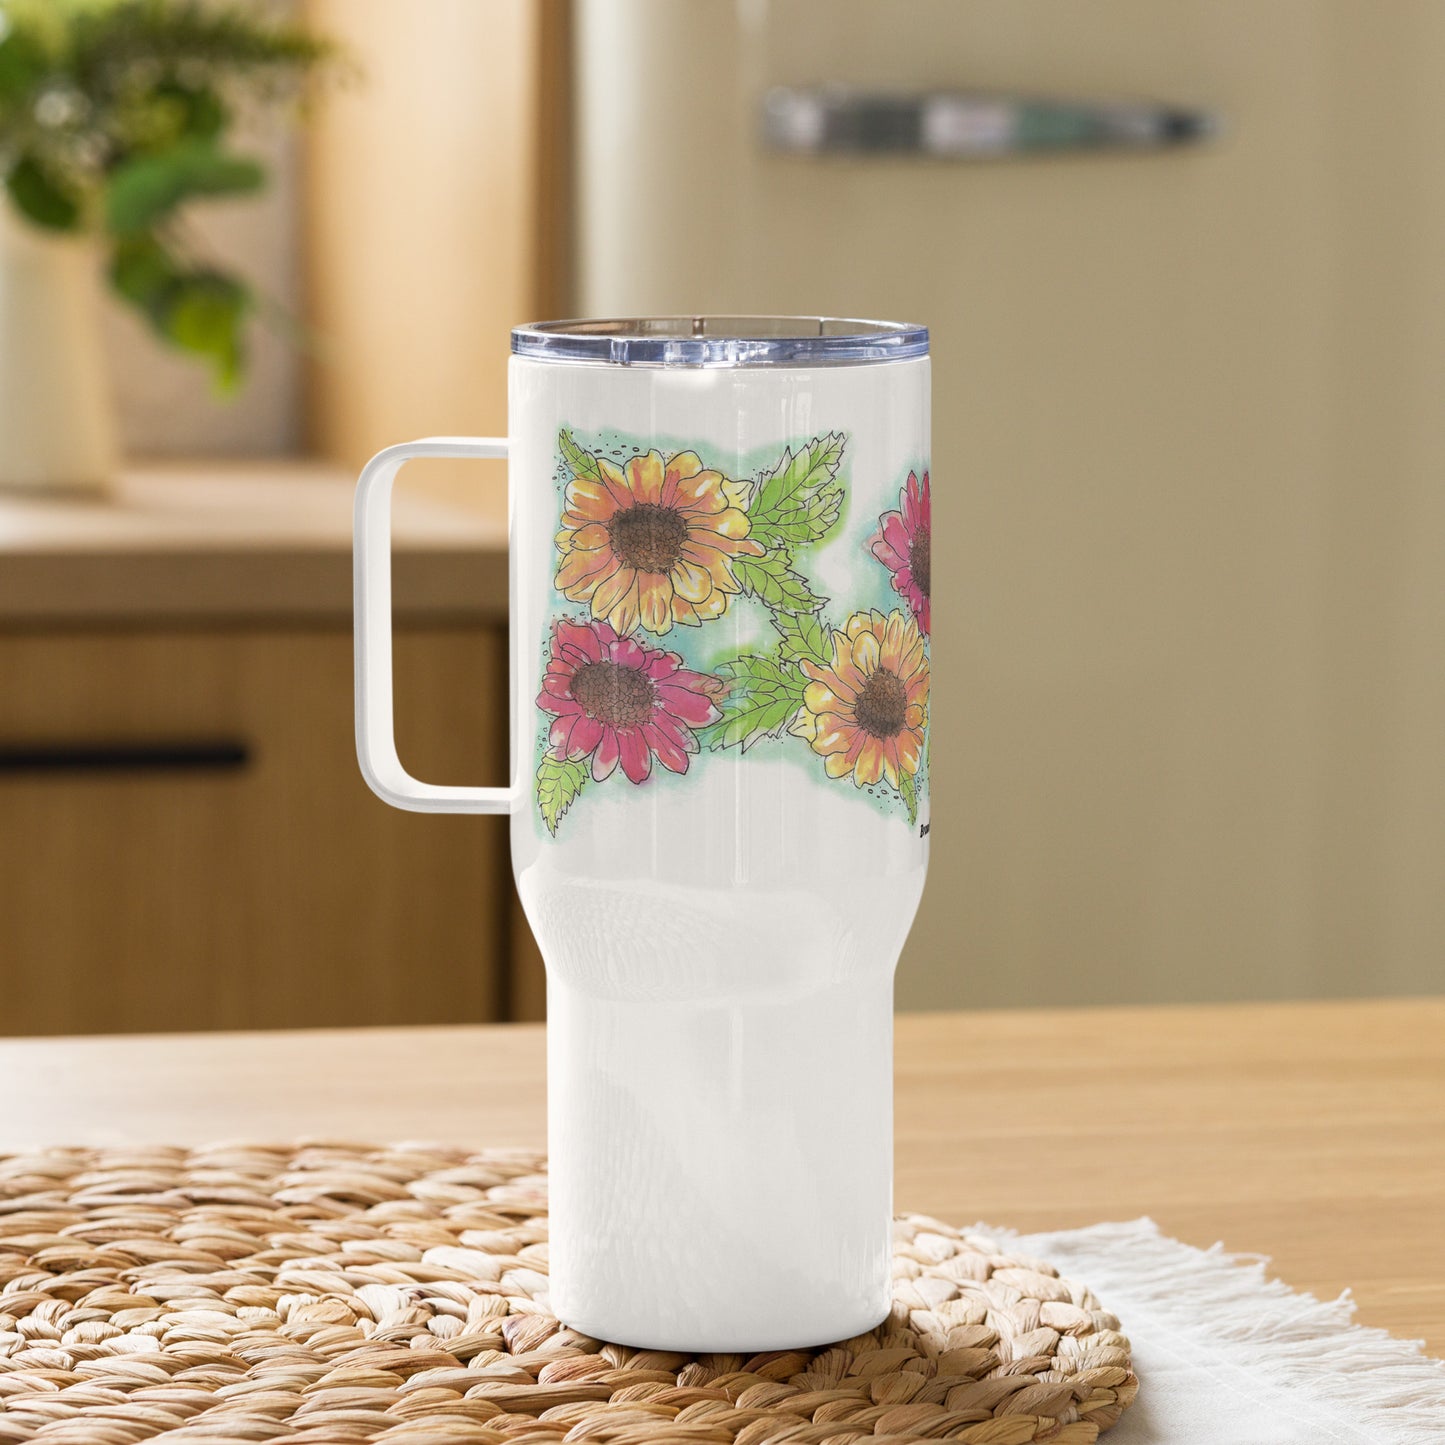 Gerber daisies stainless steel travel mug with handle. Holds 25 ounces and has a BPA-free plastic lid. Shown on woven placemat.